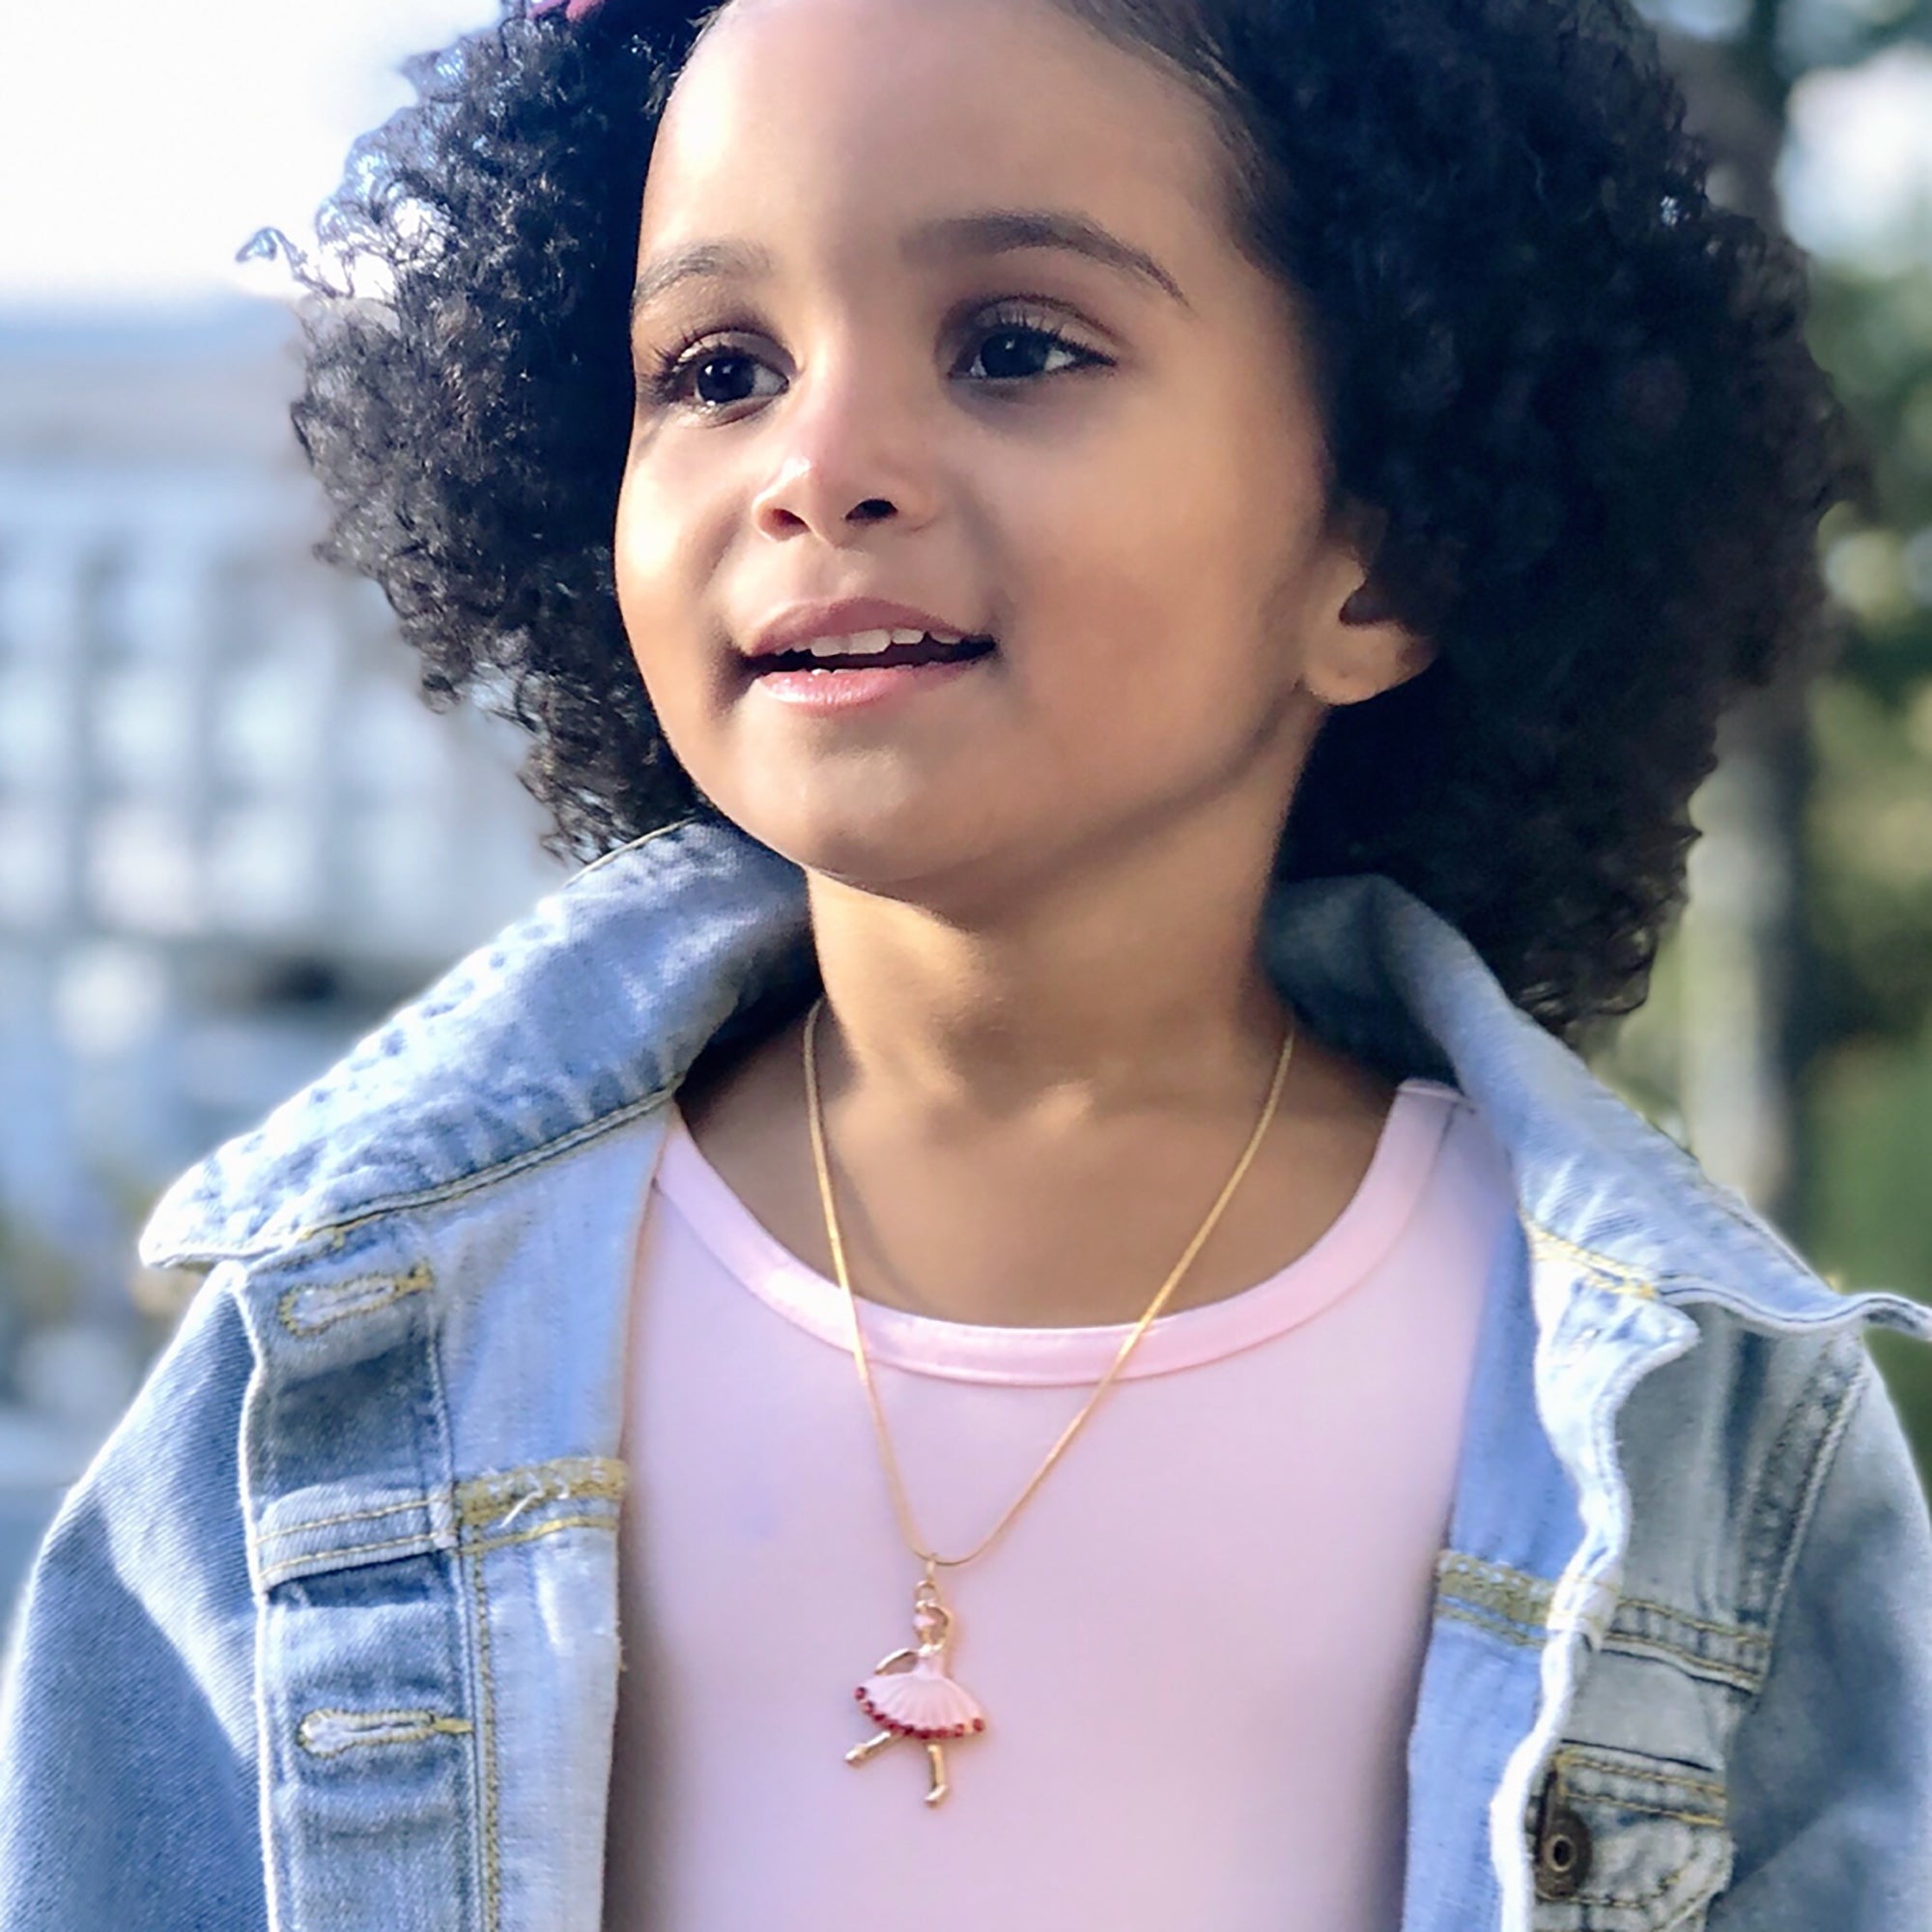 Kid's Jewelry Ballet Beauty Necklace with Gold Chain